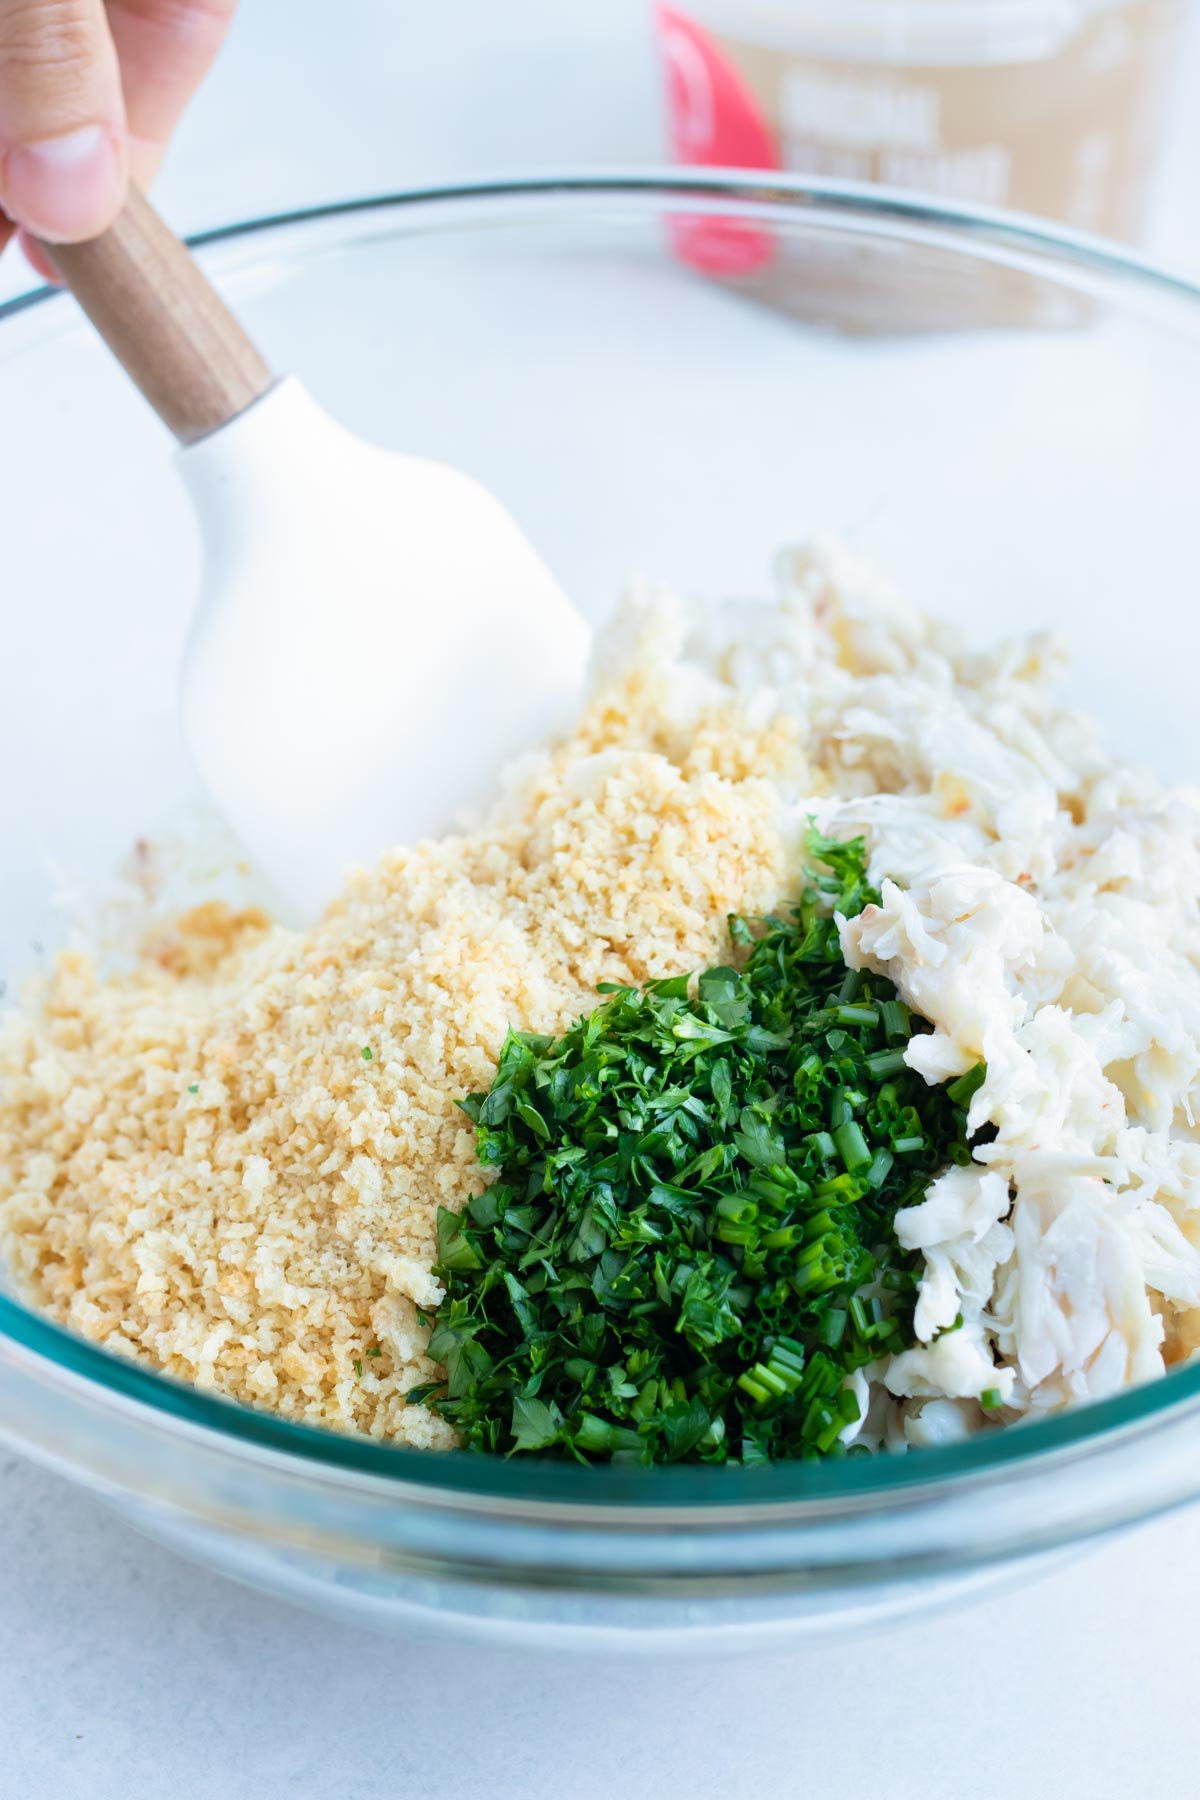 Crab meat, breadcrumbs, and chives are combined into the wet ingredients.